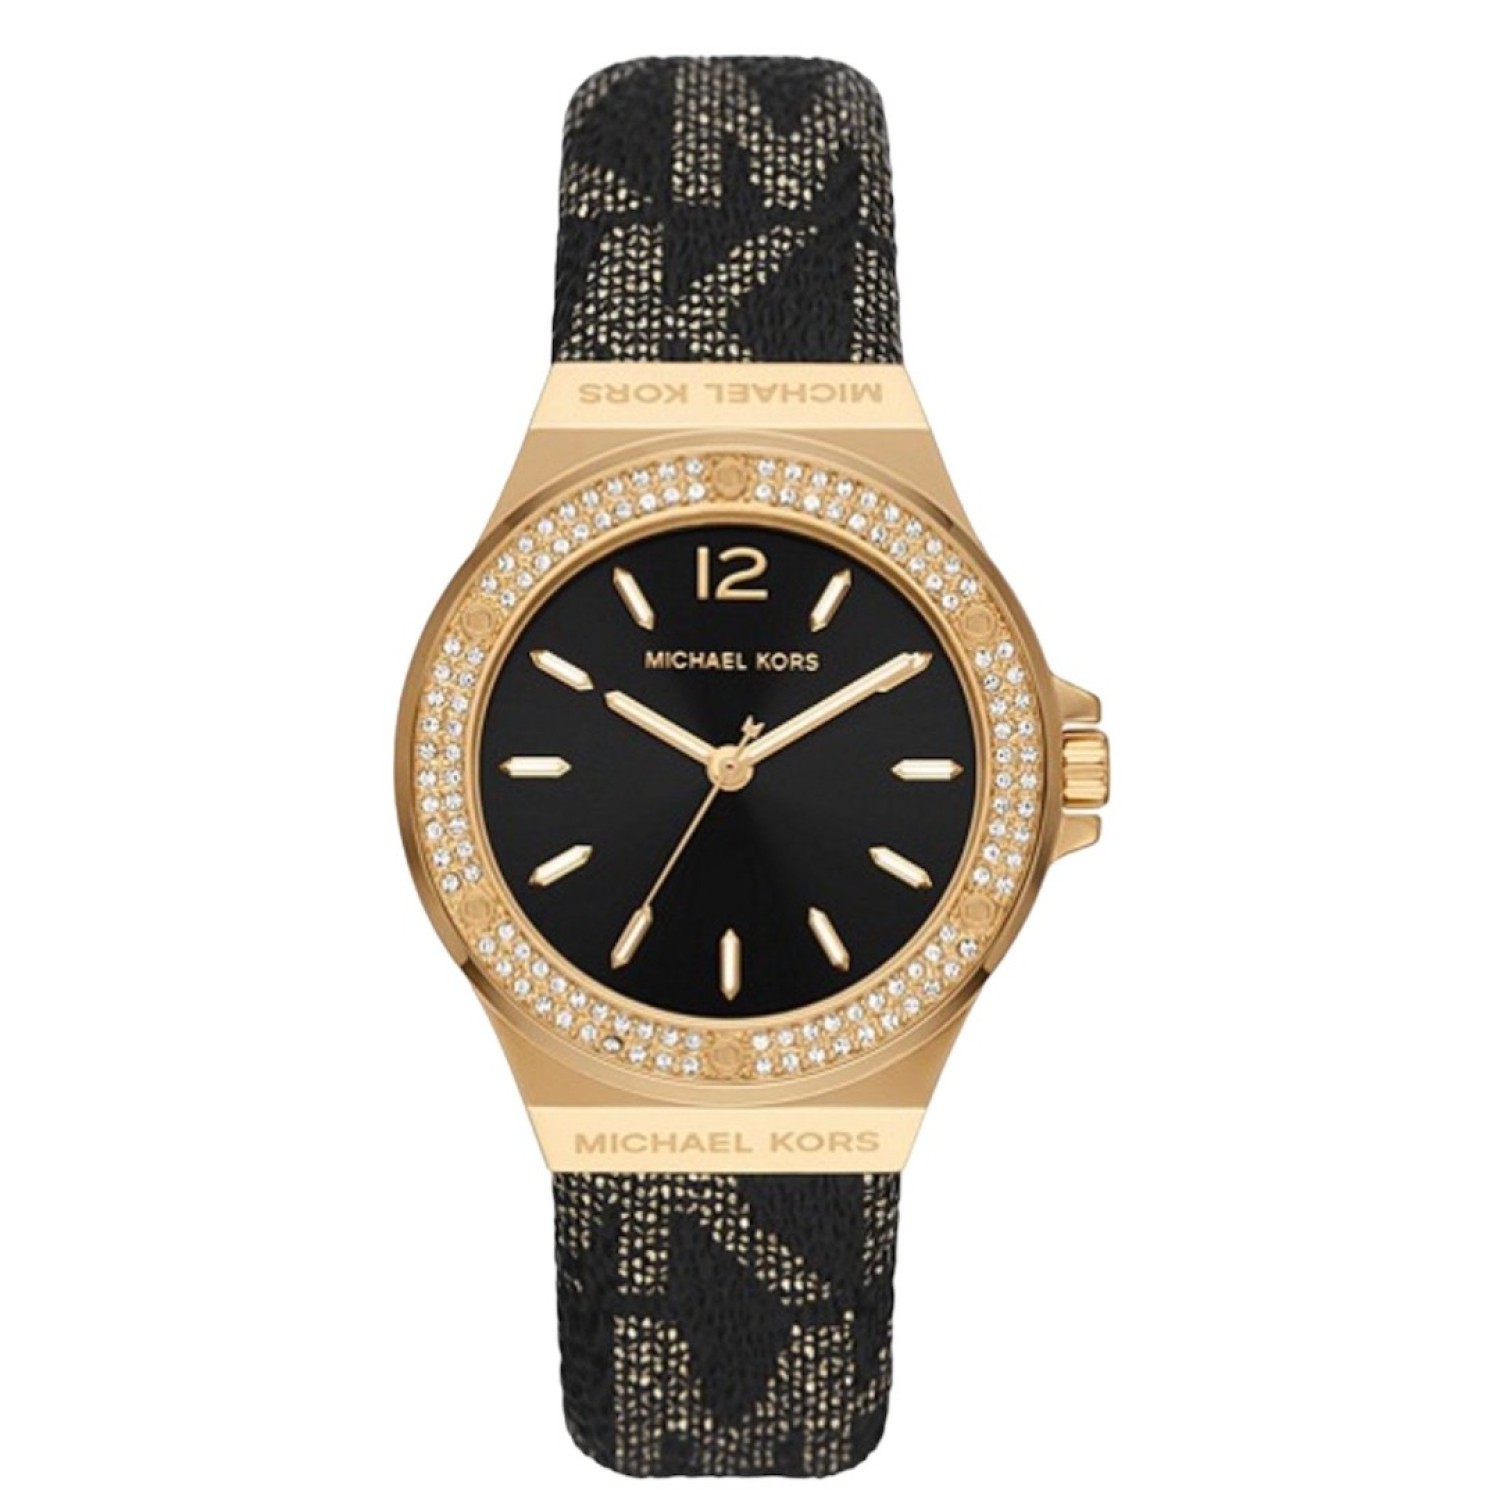 MK7281 Michael Kors Lennox Black Silicone Ladies Watch. The Michael Kors Lennox MK7281 Ladies watch is a statement accessory with a gold and black color scheme.